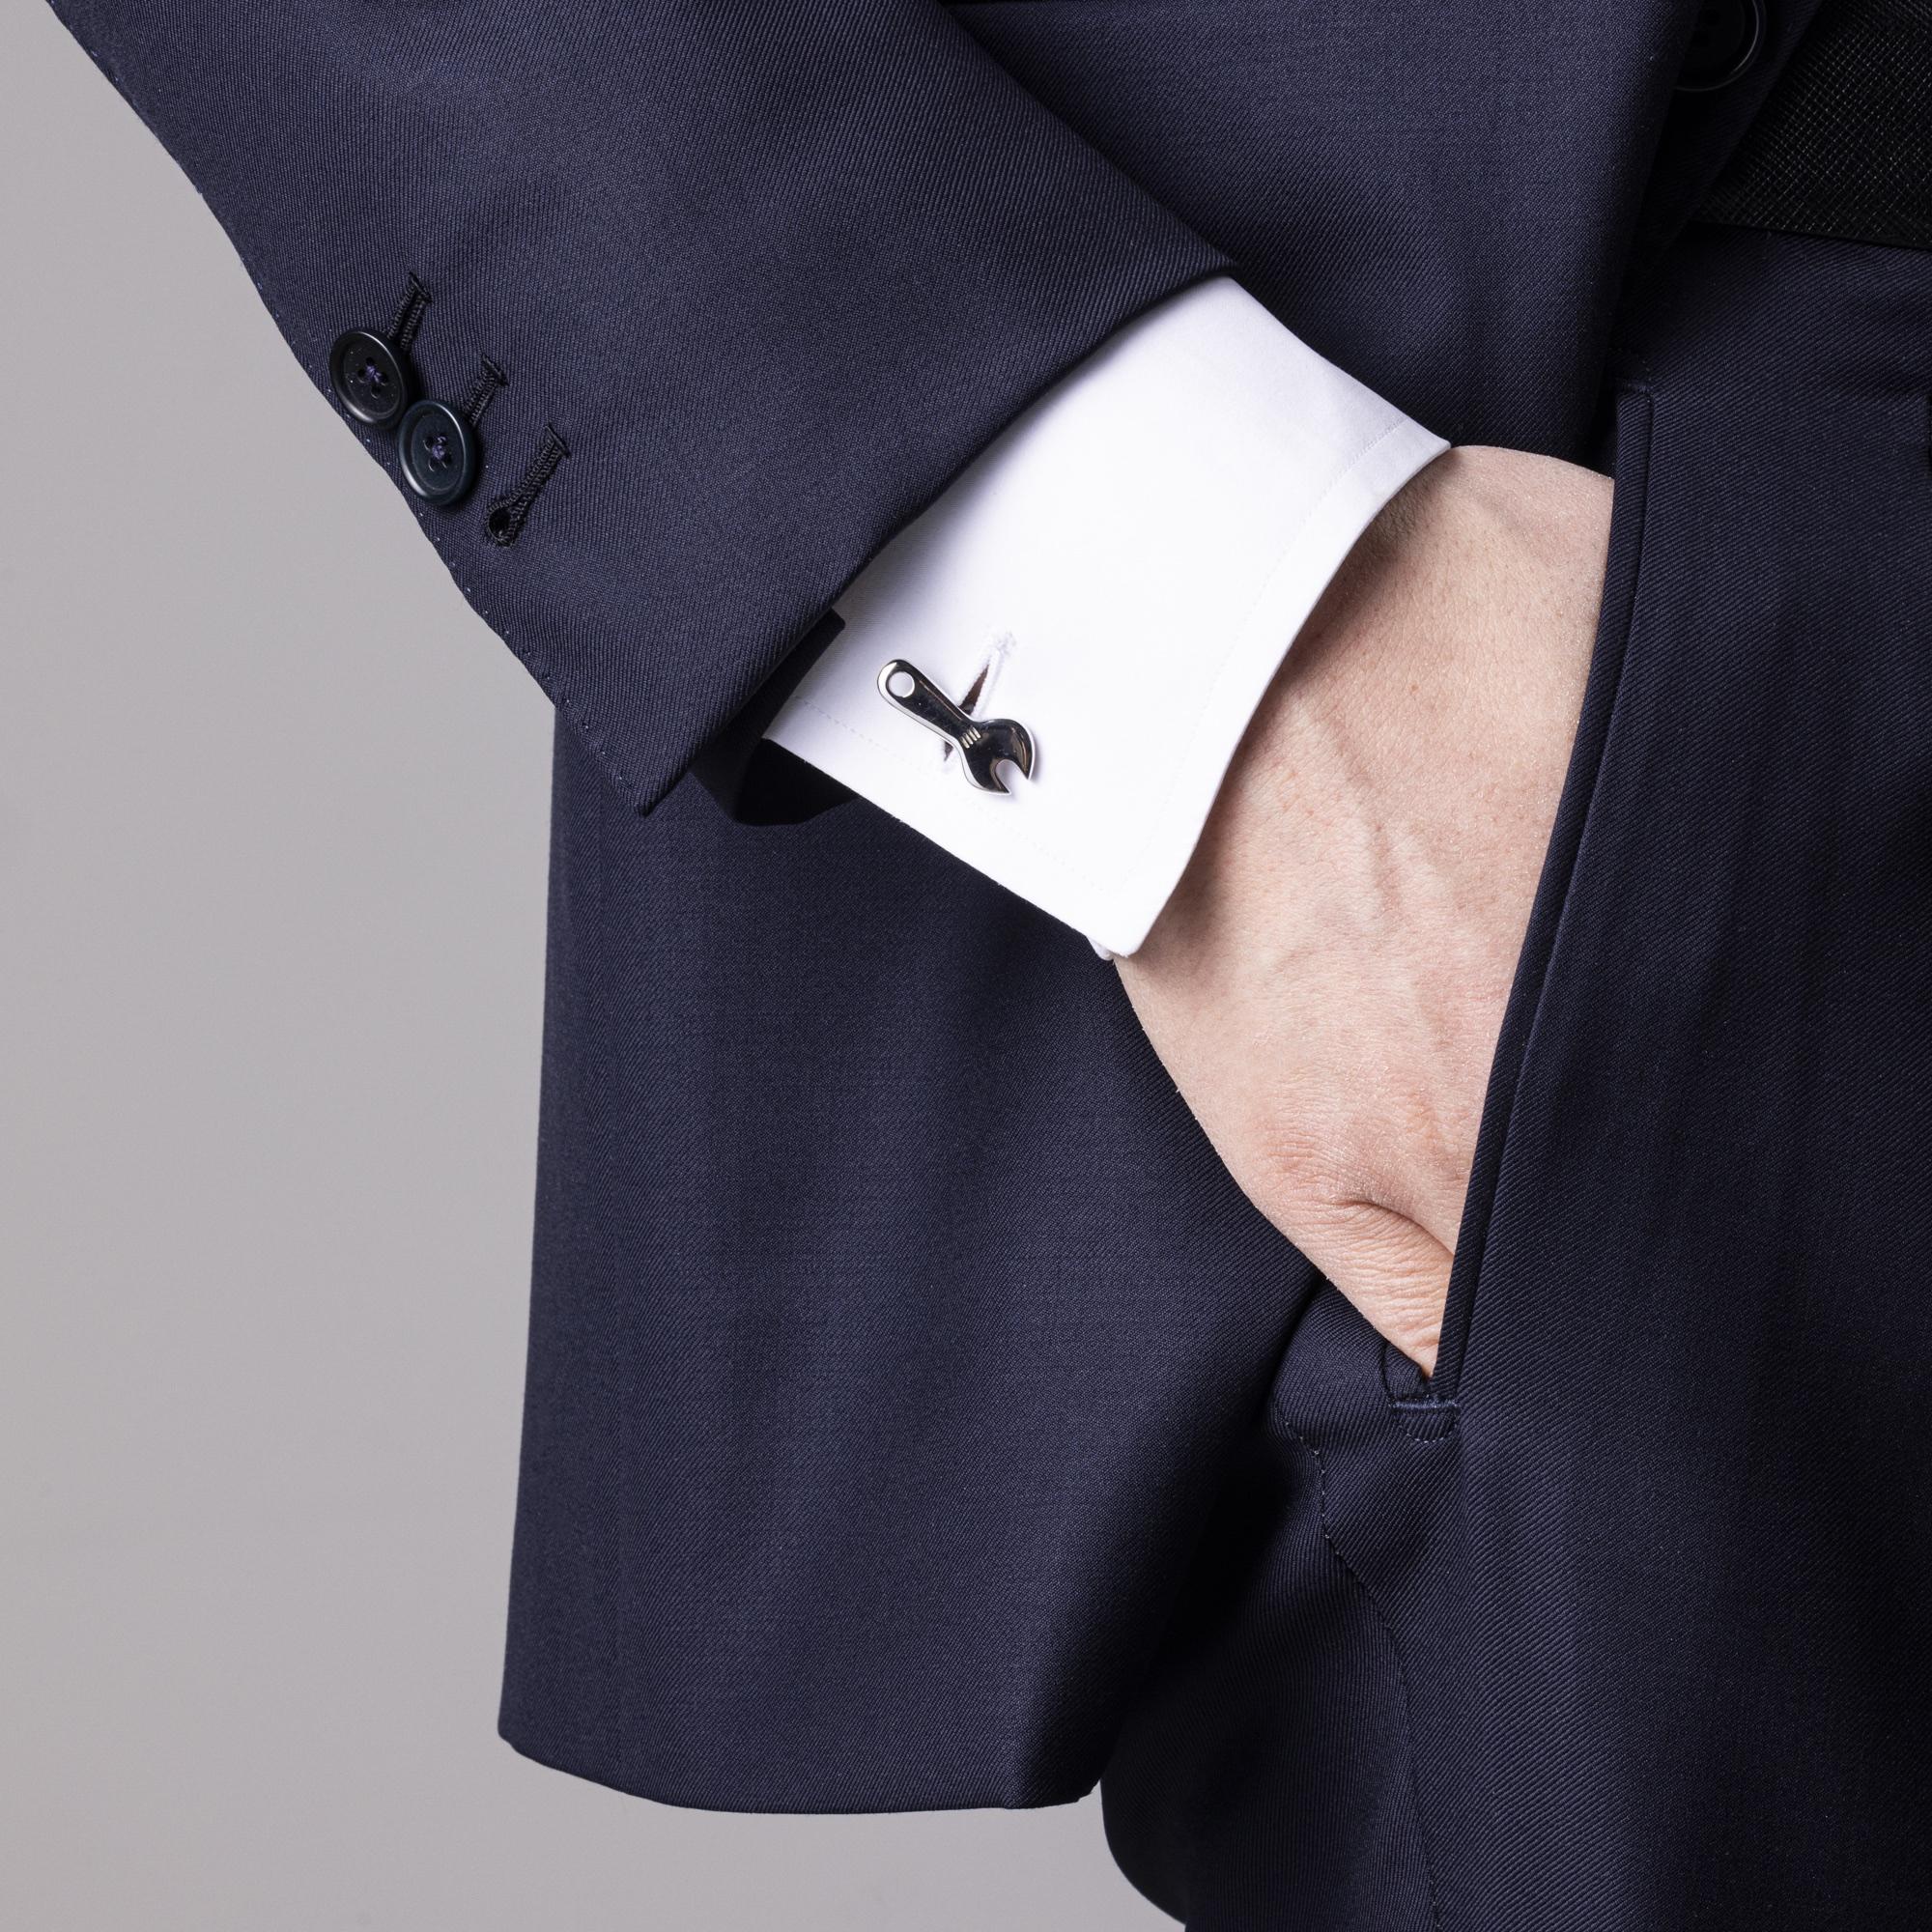 Alex Jona design collection, hand crafted in Italy, rhodium plated sterling silver wrench cufflinks. These cufflinks feature a T-Bar fastening, aiding in easy use and confidence that they'll stay secured to your shirt. 
Alex Jona cufflinks stand